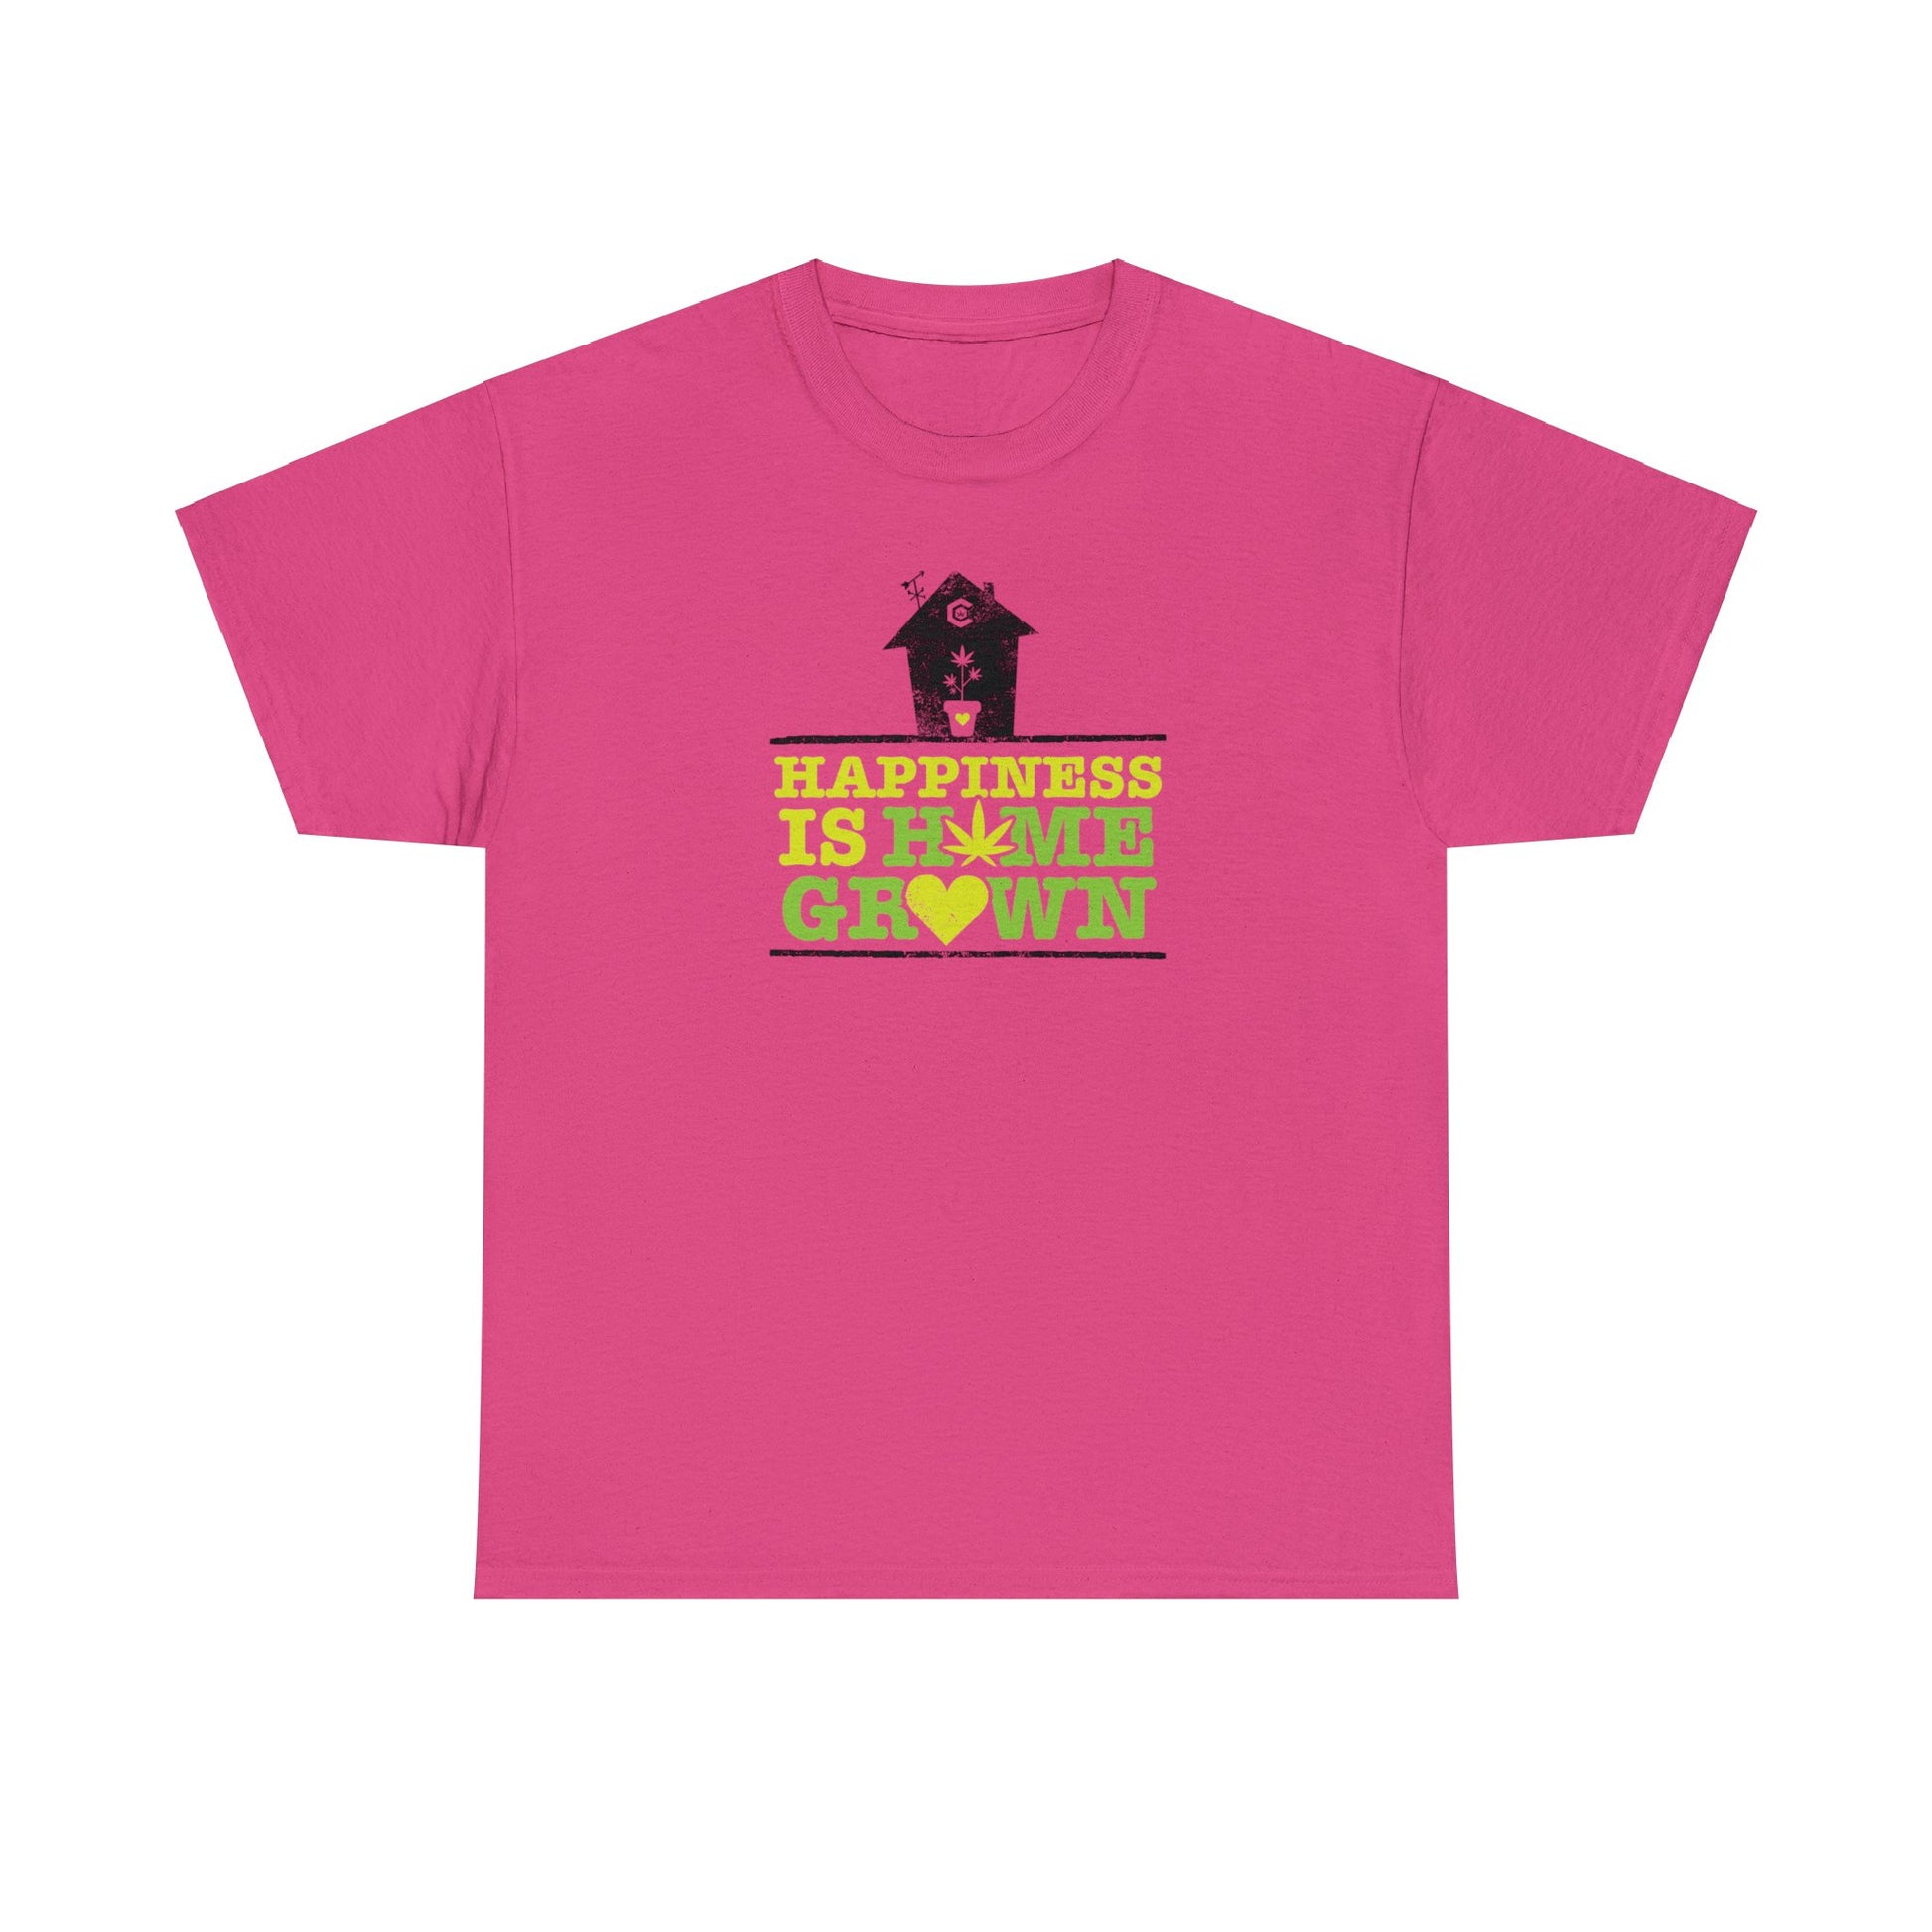 A Happiness Is Homegrown Pot shirt featuring an image of a heart and a house design.